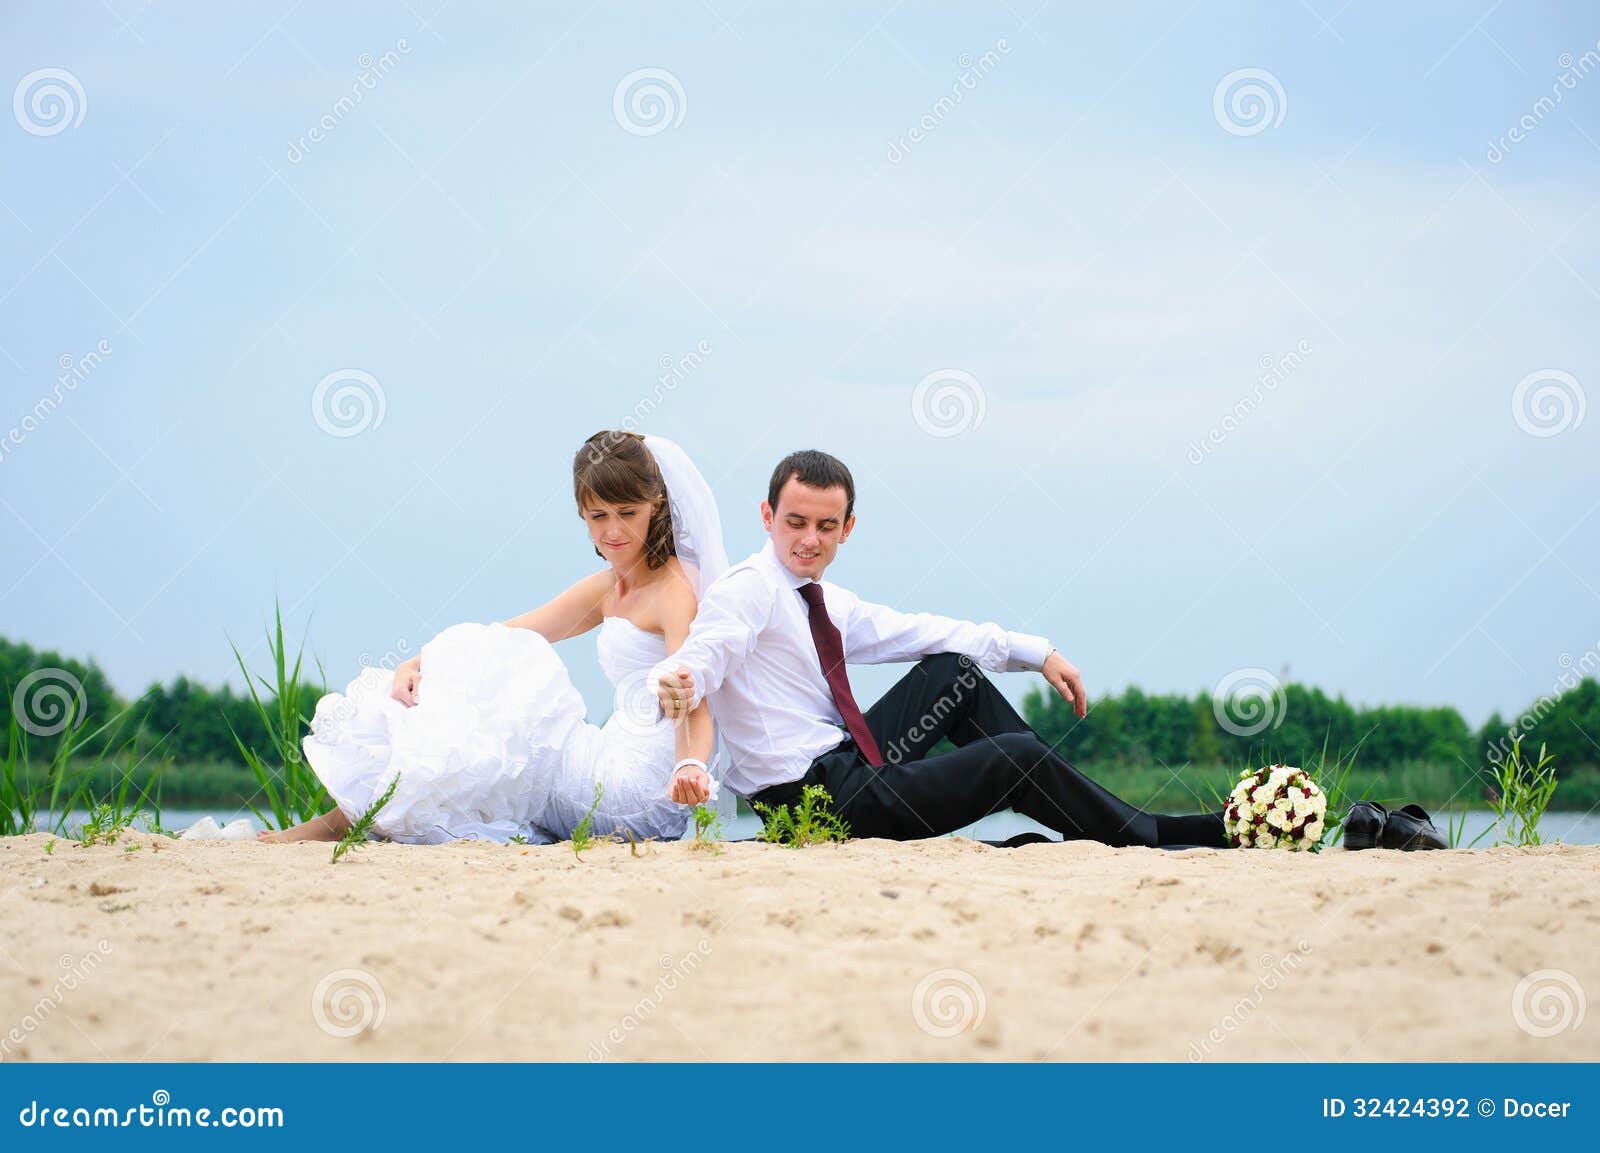 loving wedding couple sitting near water and strew sands